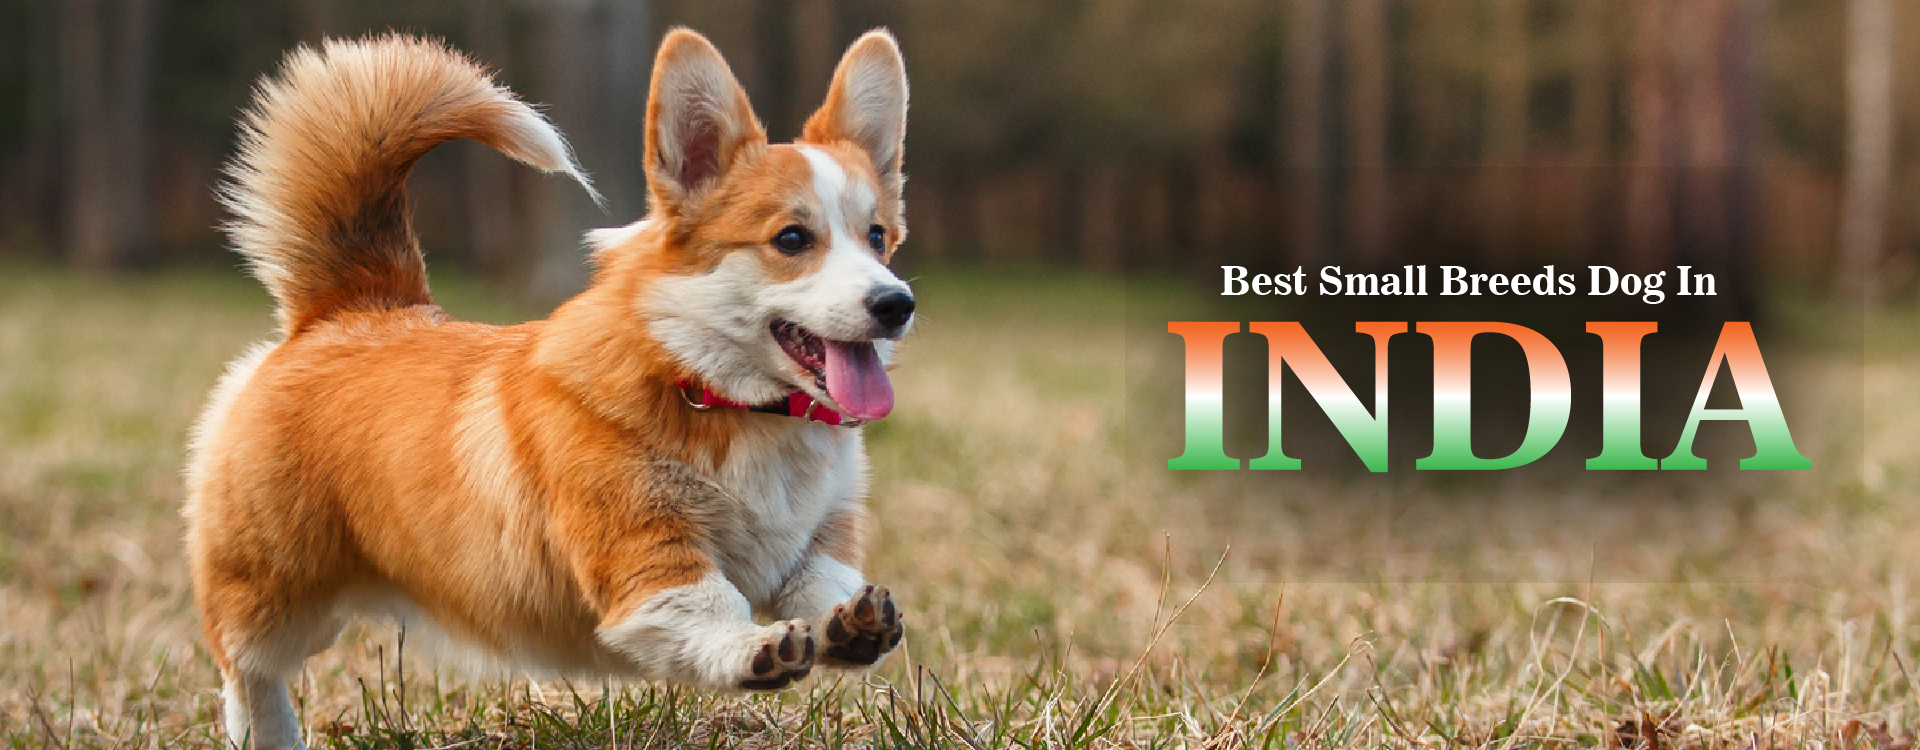 Dog Breeds In India Nappets